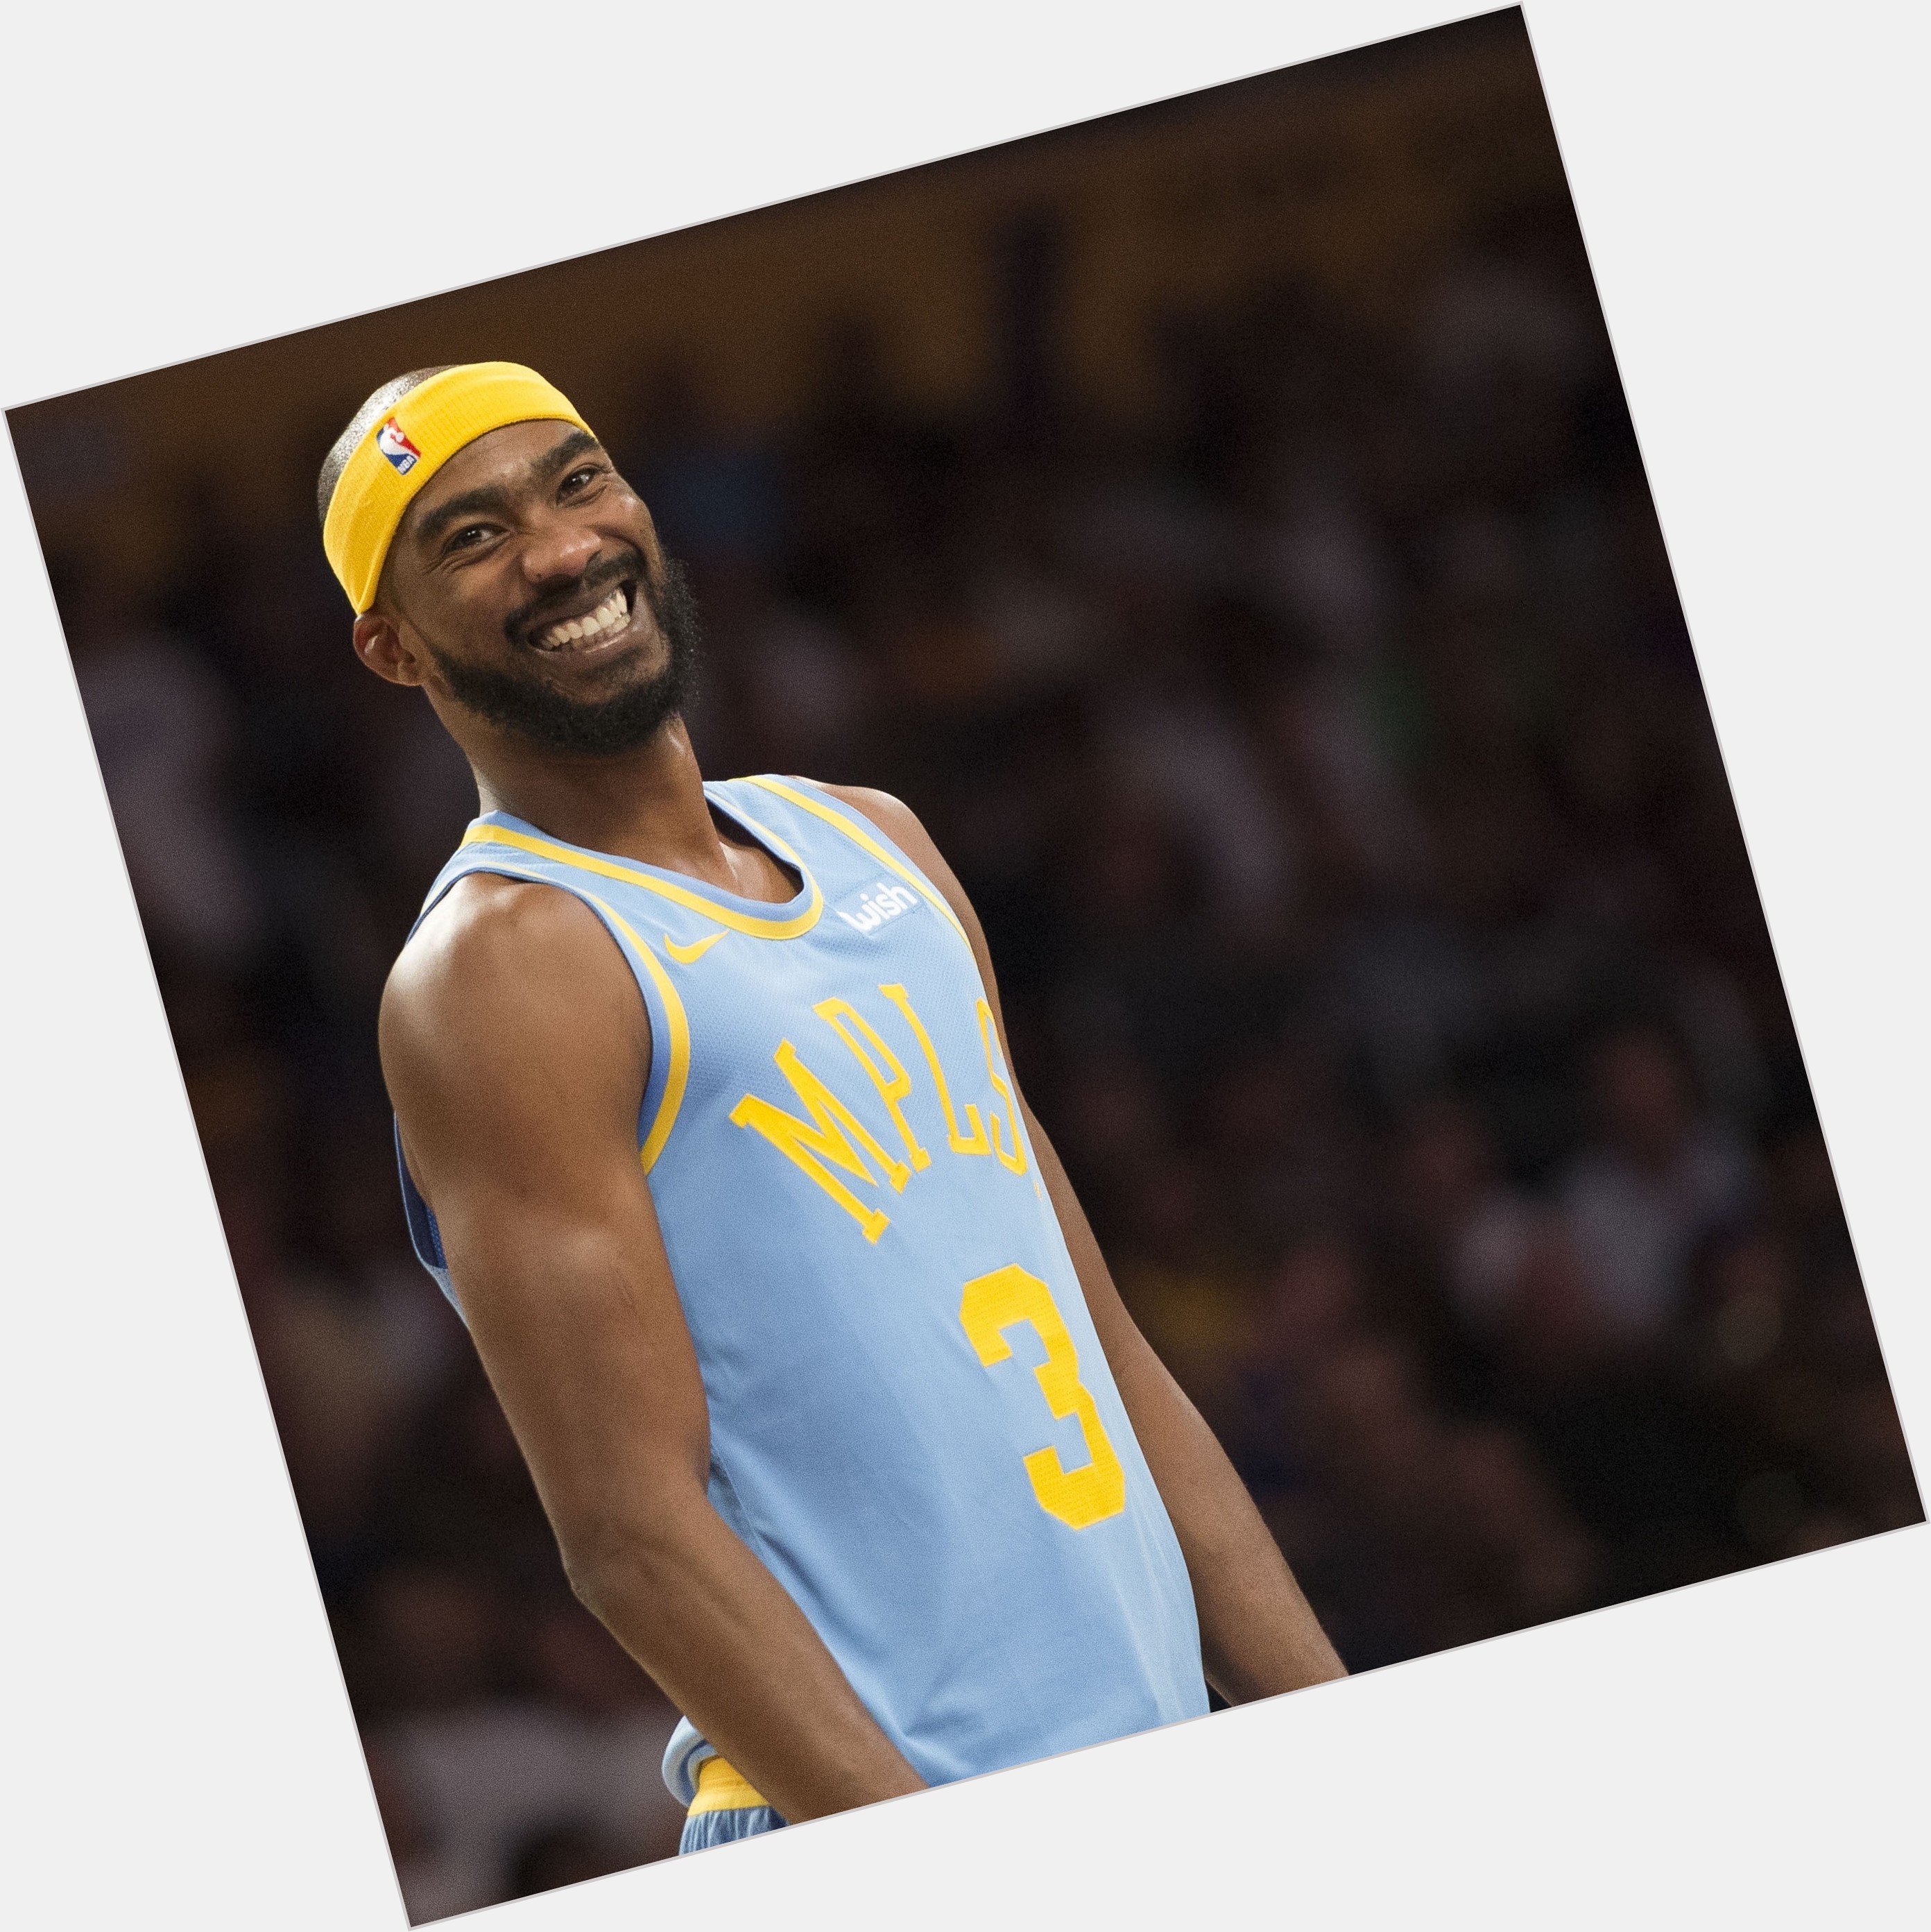 Corey Brewer exclusive hot pic 3.jpg